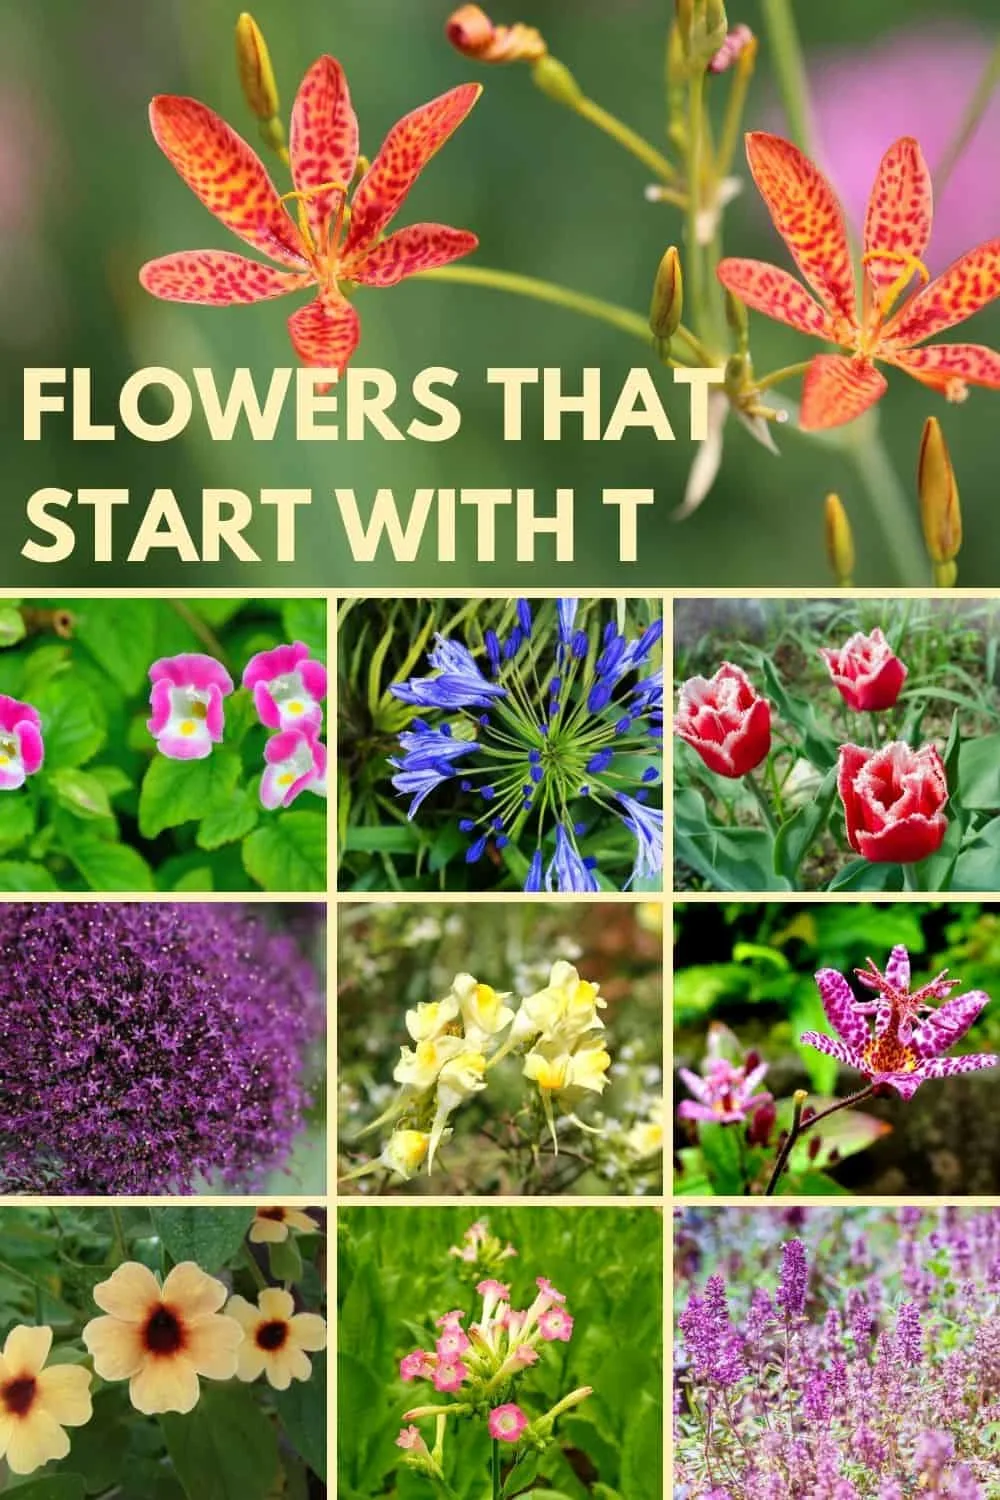 Flowers that start with t